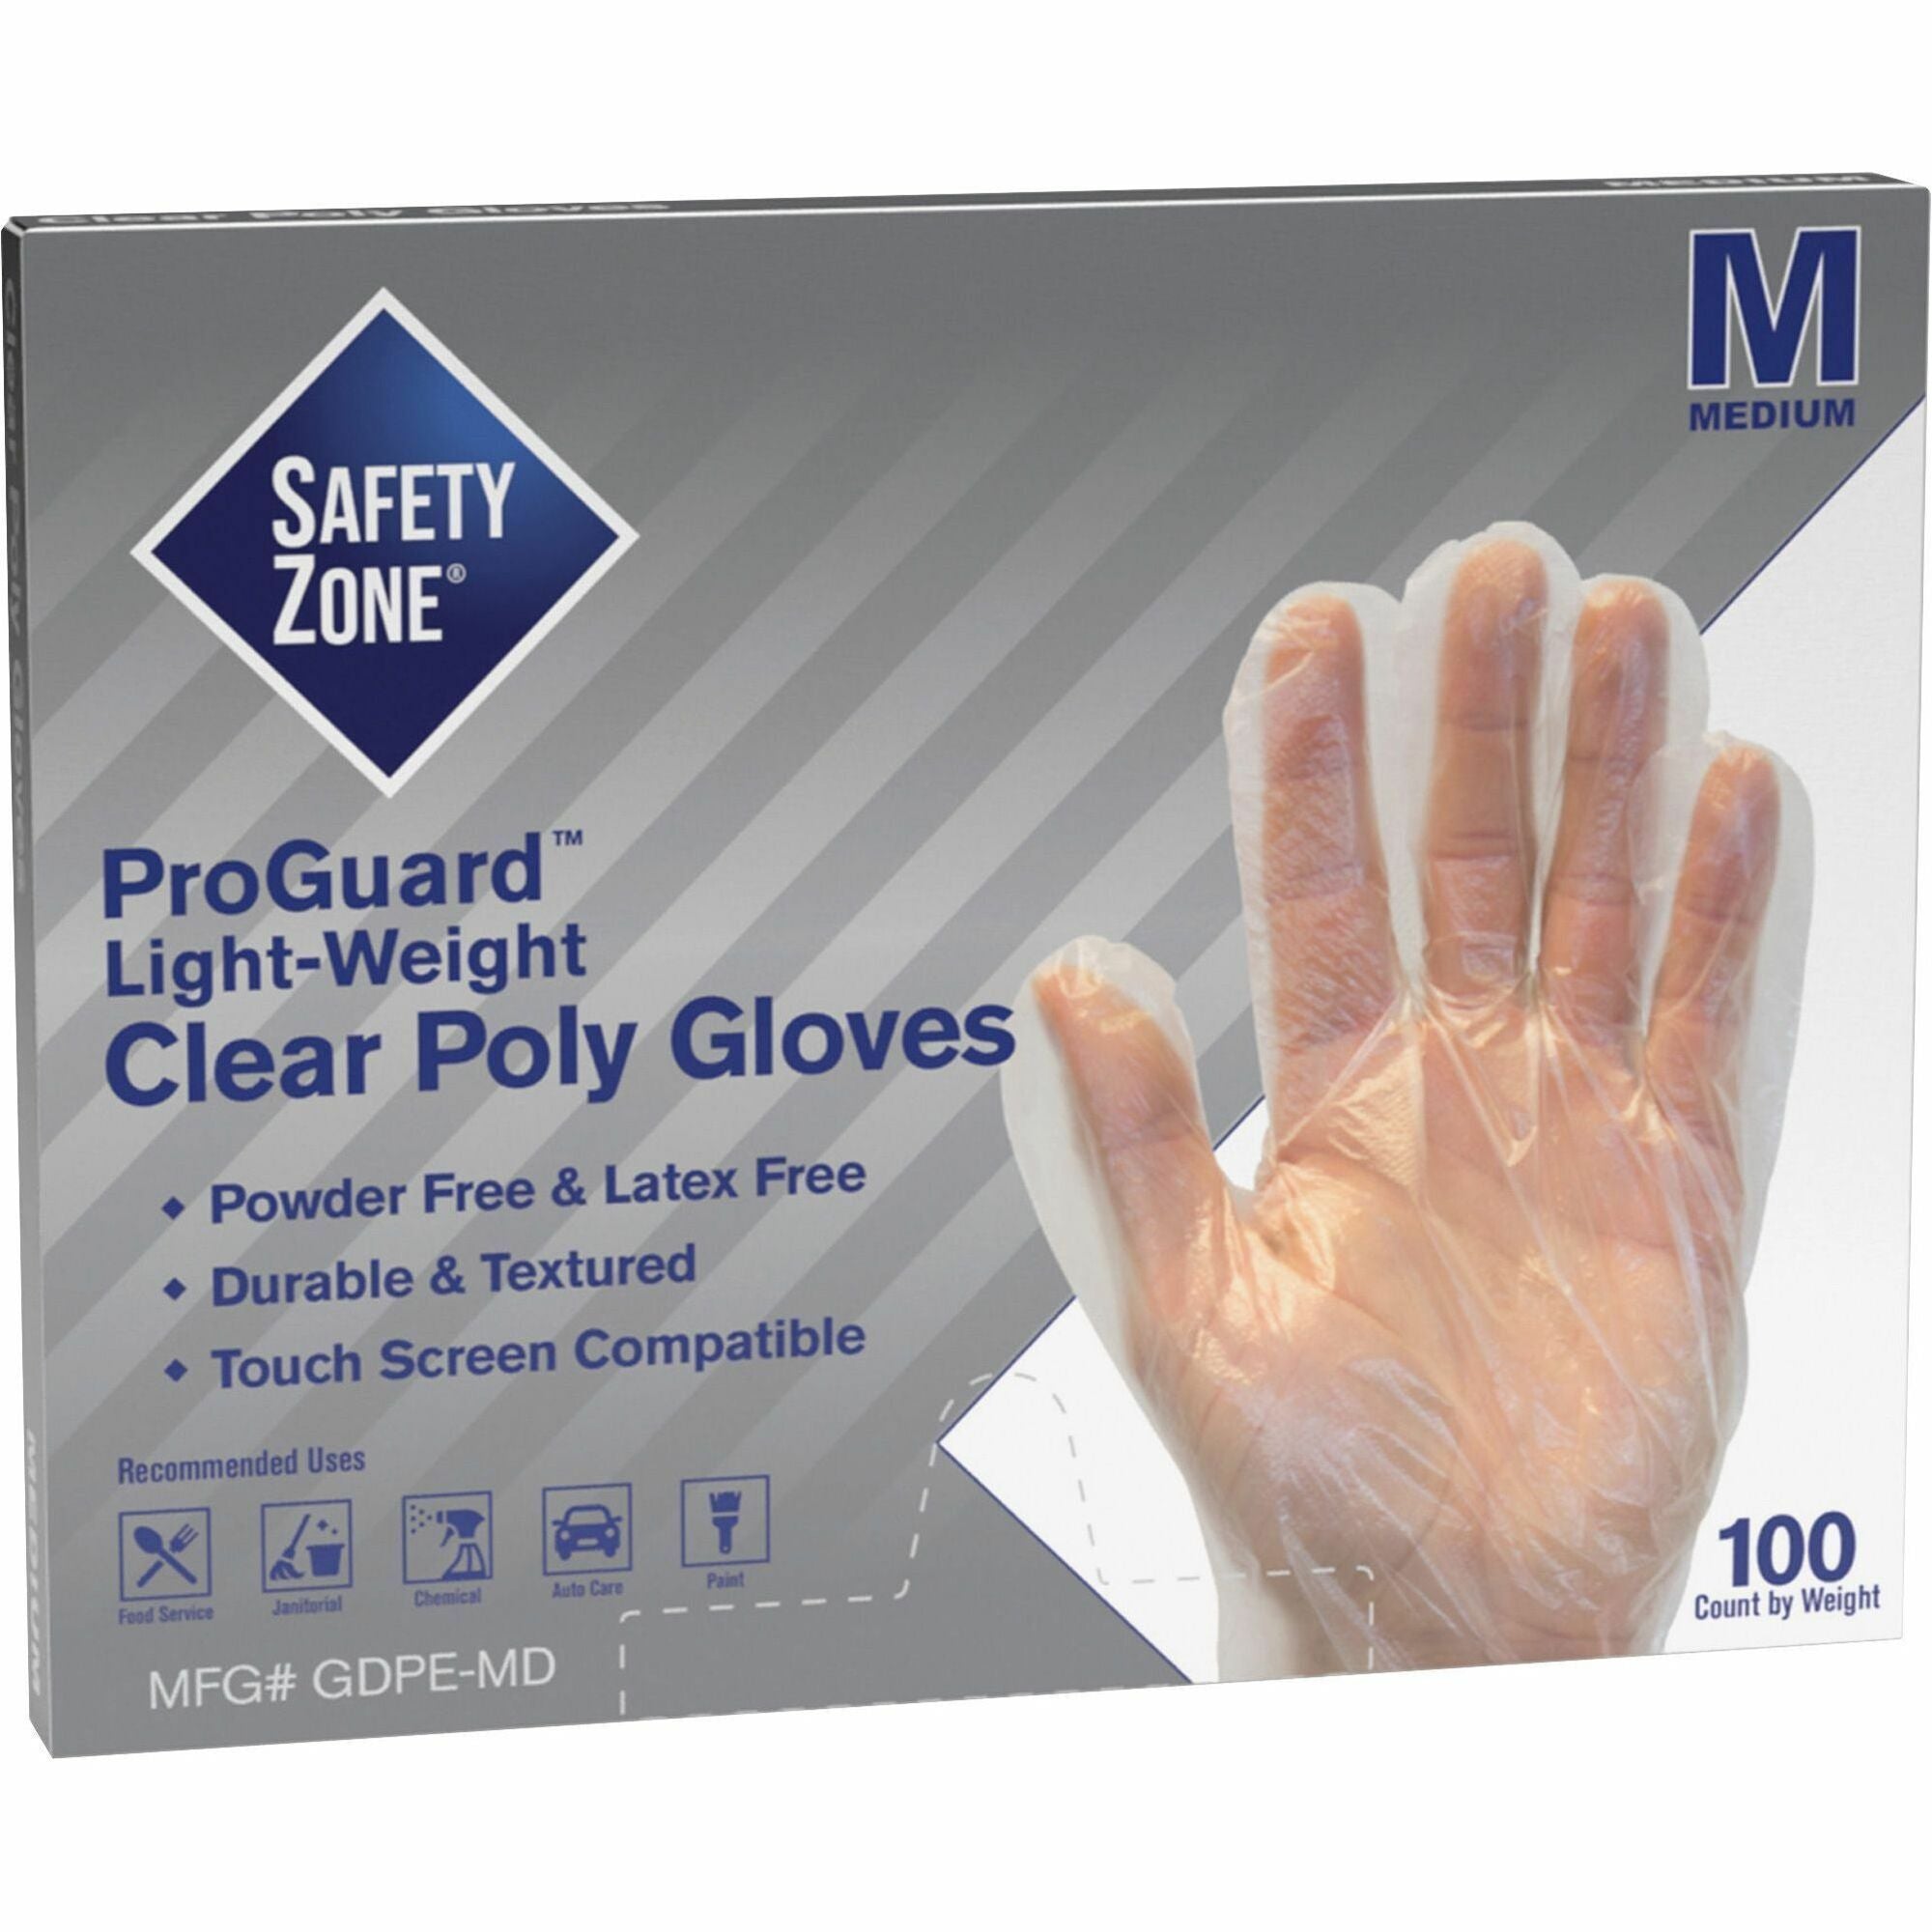 safety-zone-clear-powder-free-polyethylene-gloves-medium-size-clear-die-cut-heat-sealed-edge-embossed-grip-latex-free-silicone-free-recyclable-for-food-100-pack-1175-glove-length_szngdpemd - 1